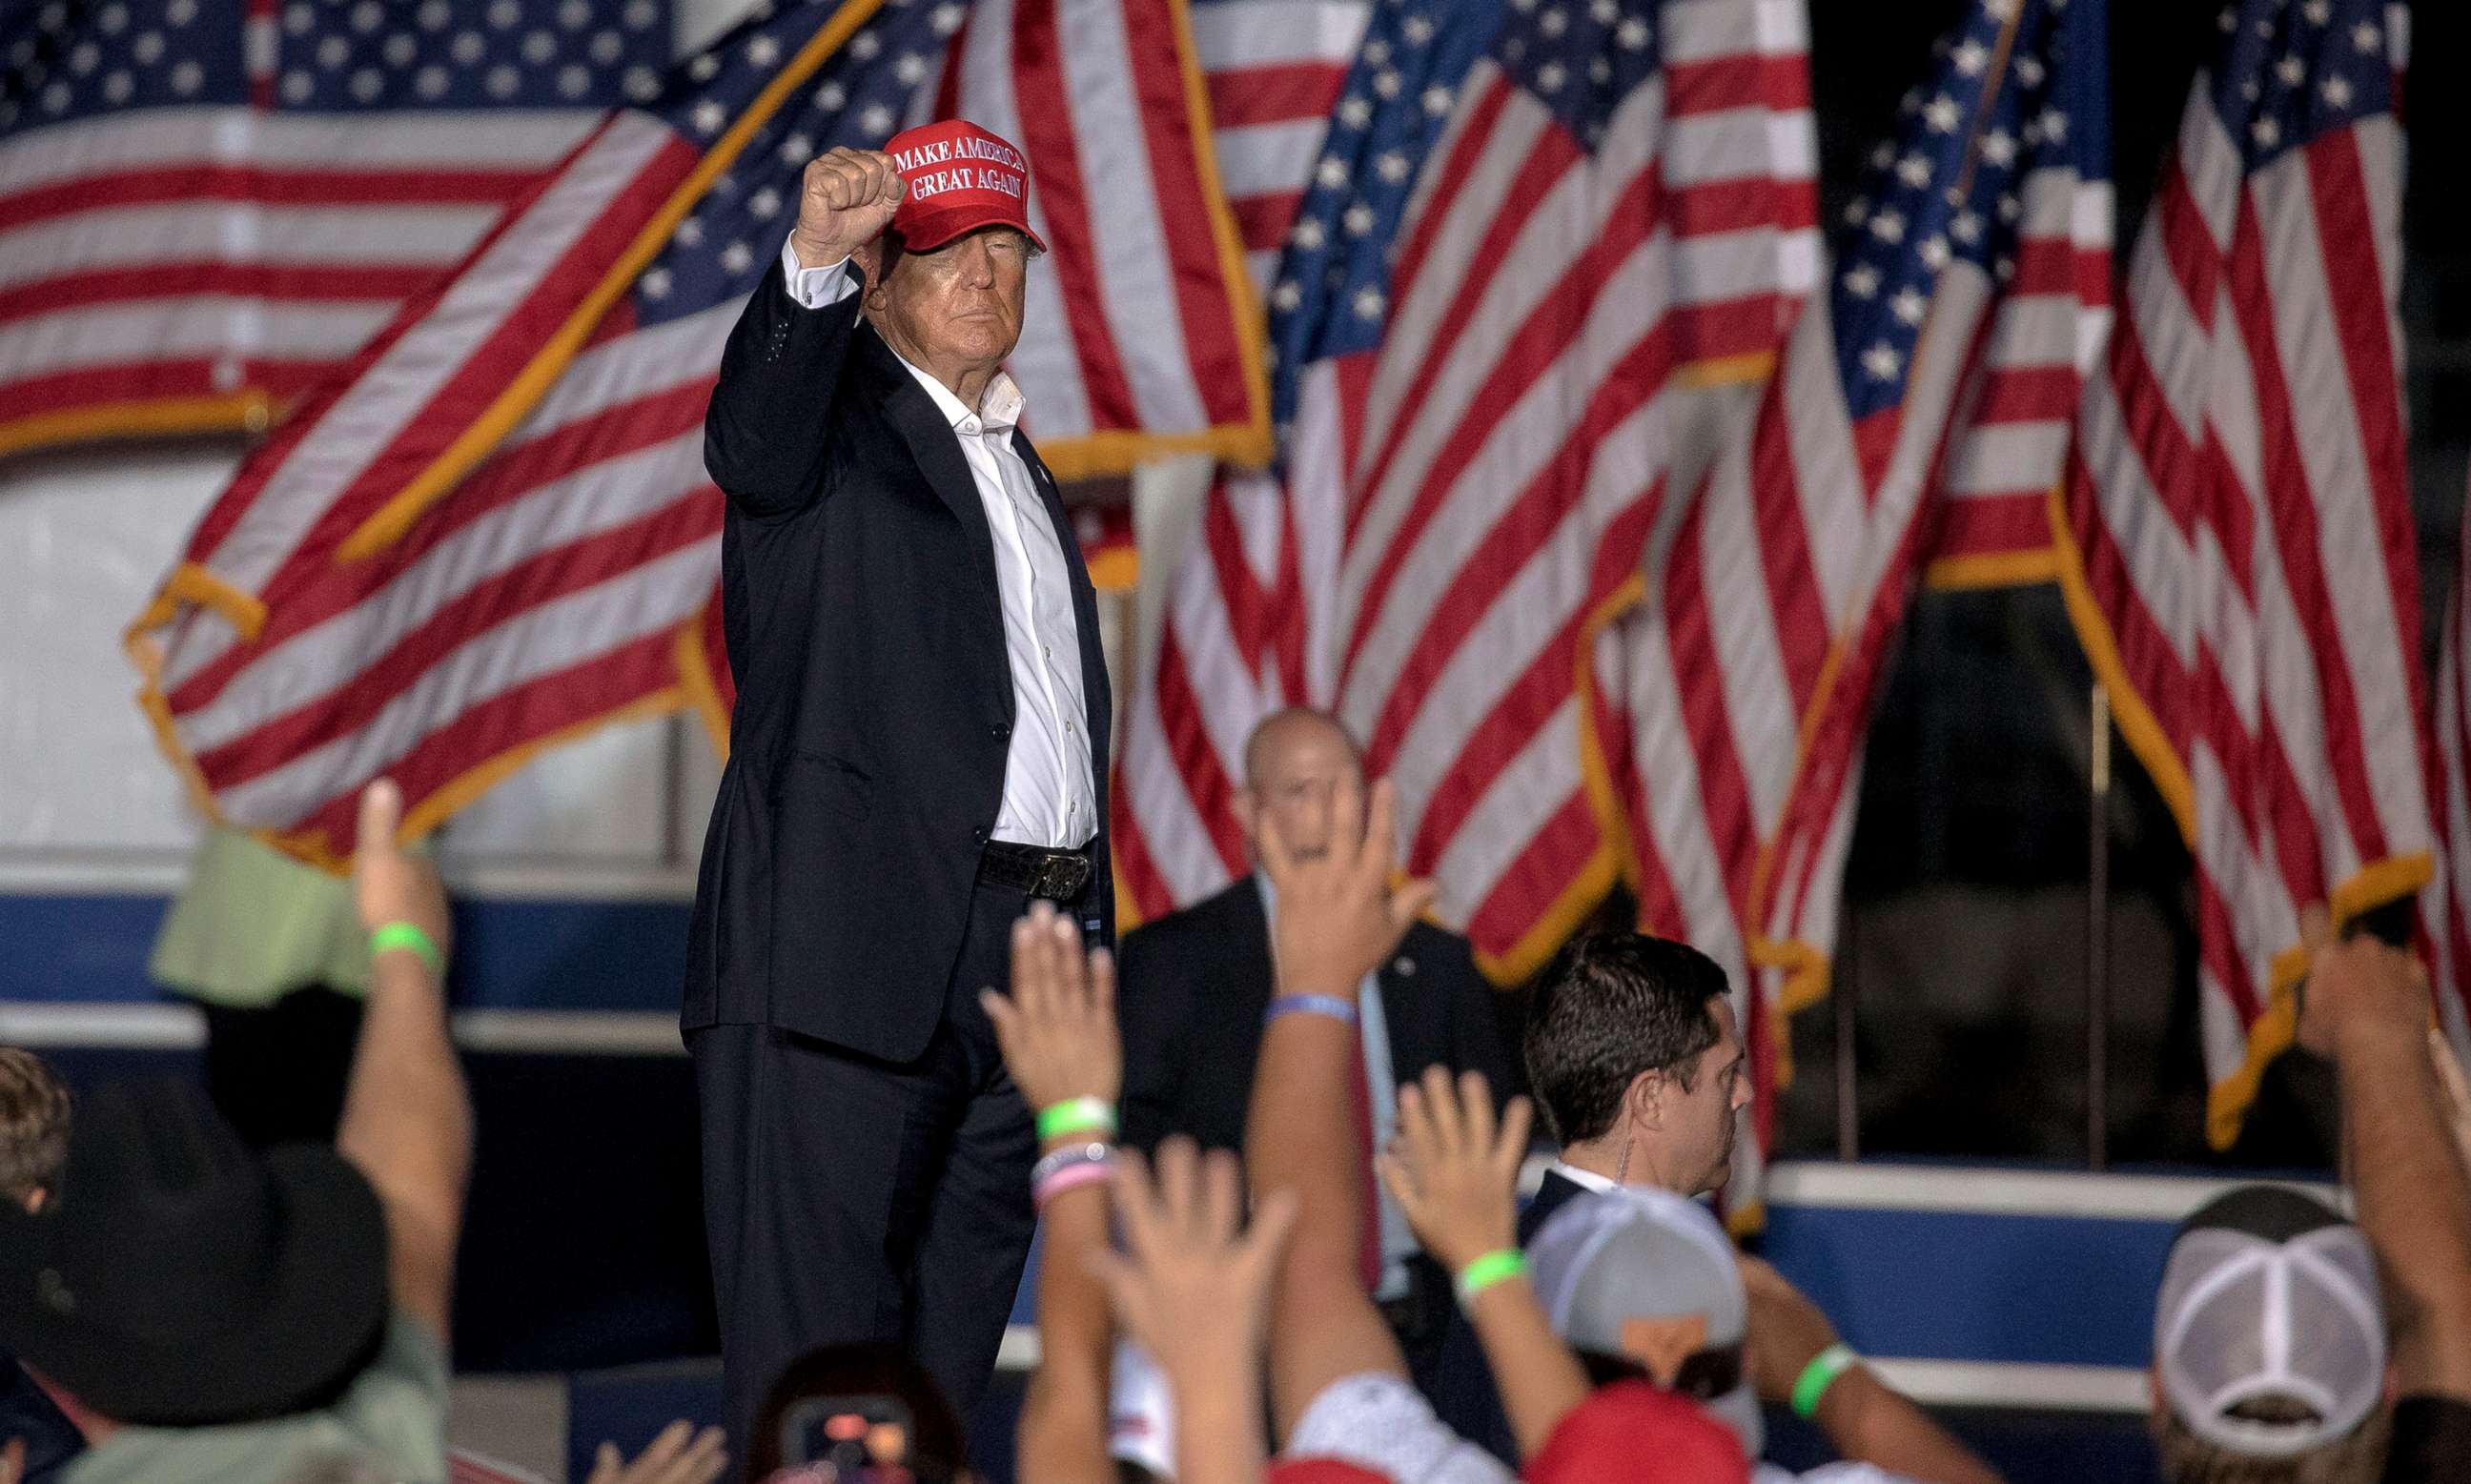 PHOTO: Former President Donald Trump gestures to supporters at a rally, Oct. 22, 2022, in Robstown, Texas.